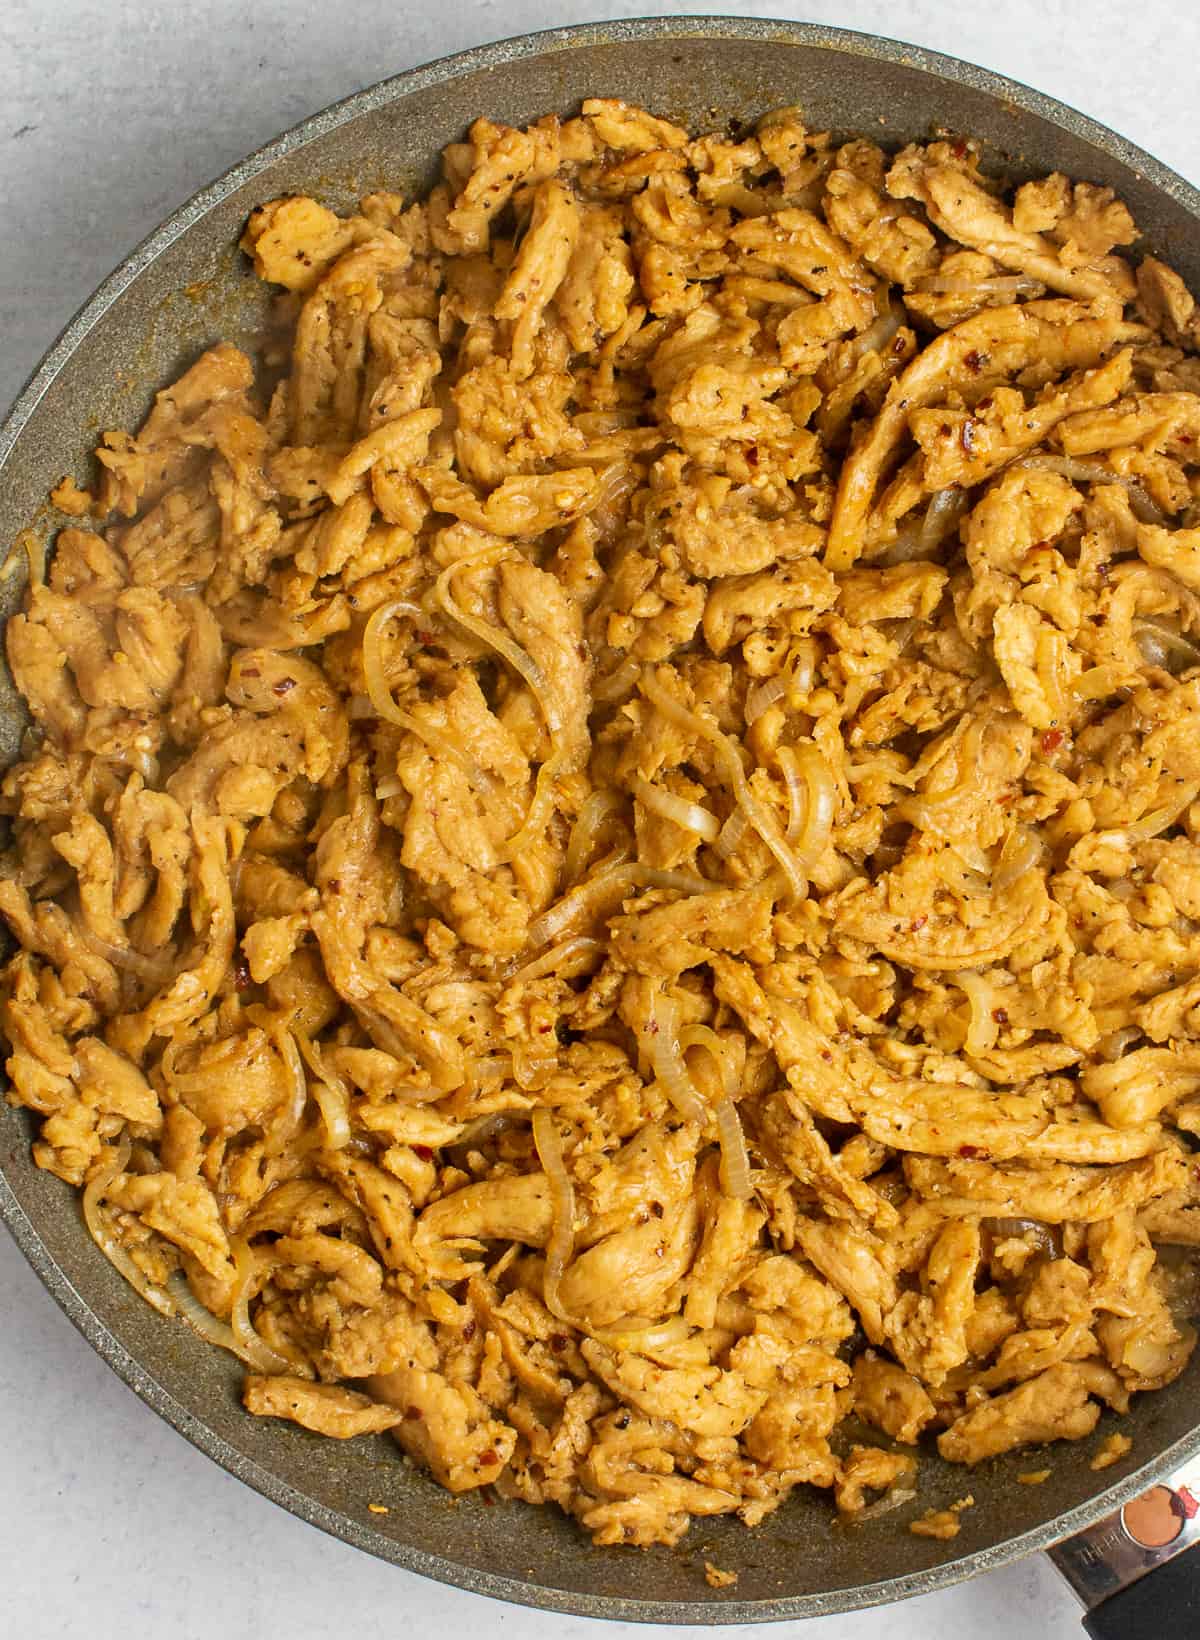 Soy curls and onions in skillet.